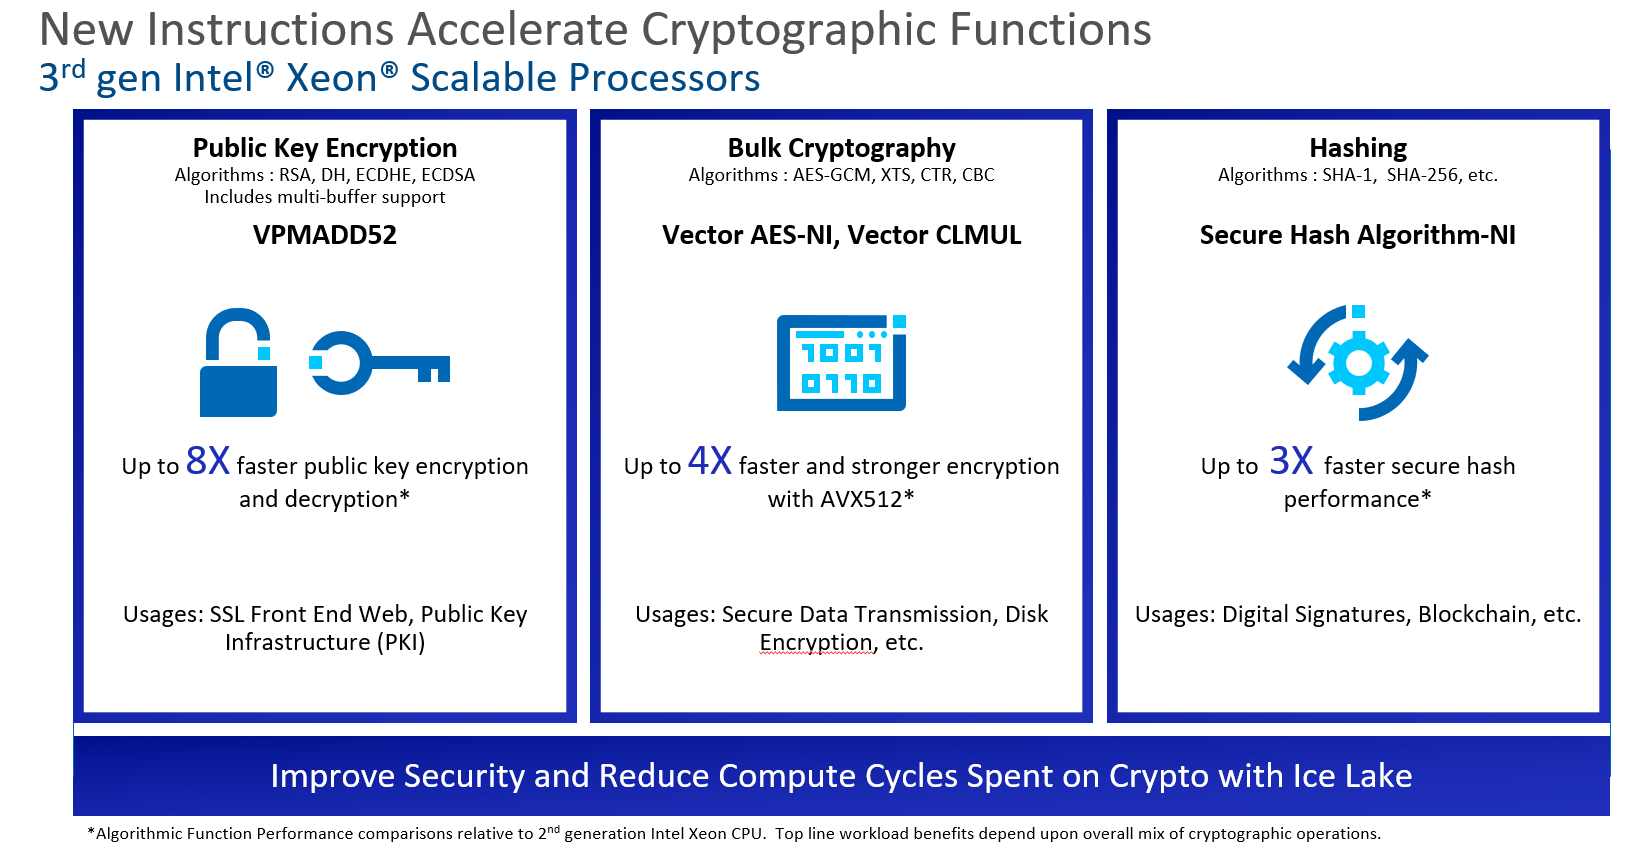 Blockchain Cryptographic Function Acceleration with 3rd Gen Intel Xeon